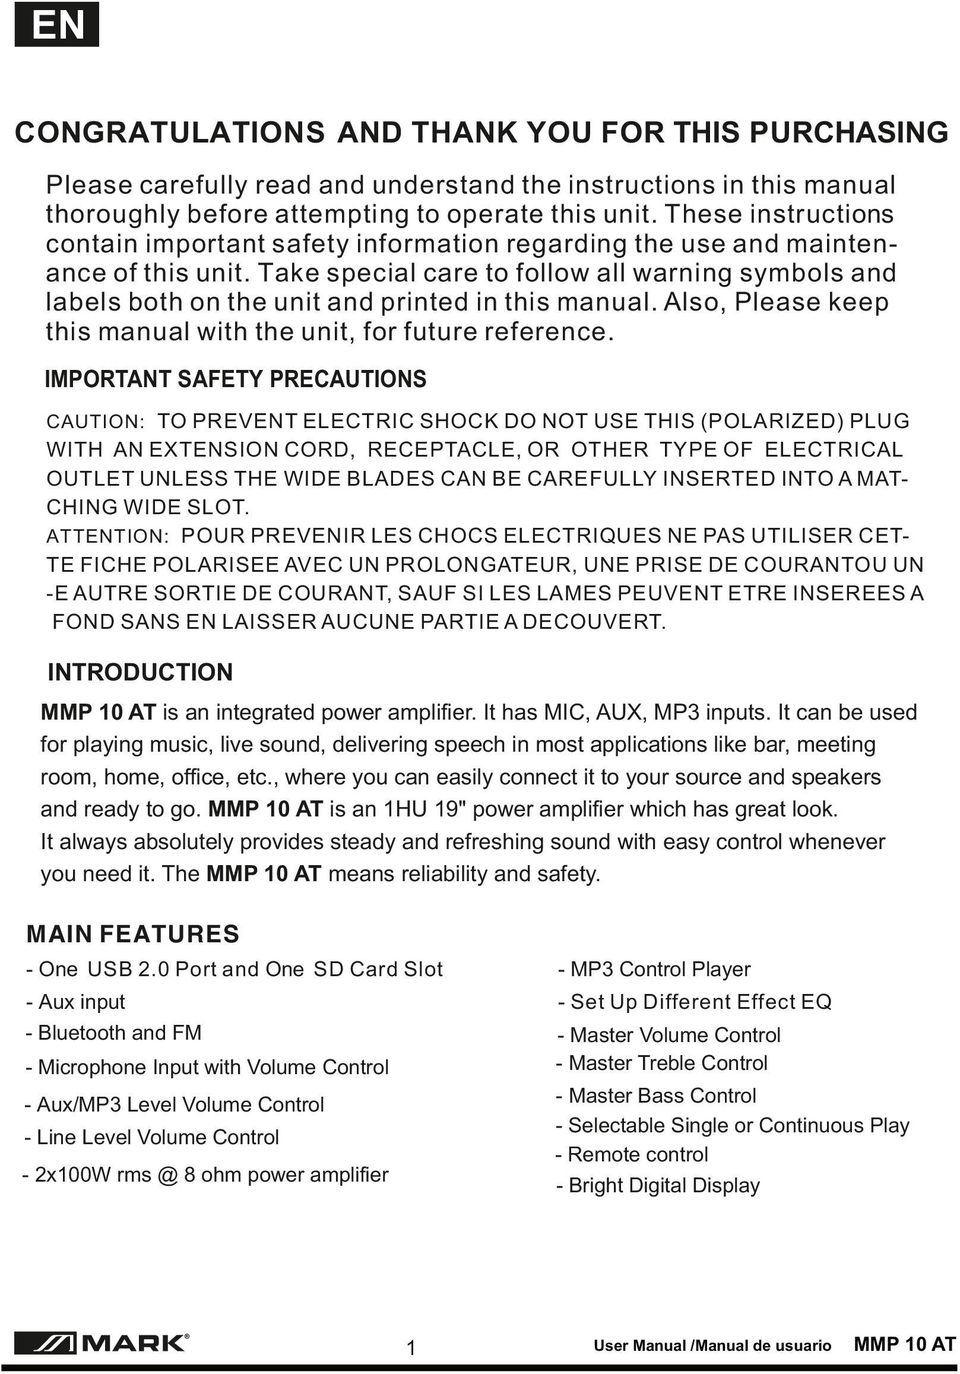 Take special care to follow all warning symbols and labels both on the unit and printed in this manual. Also, Please keep this manual with the unit, for future reference.